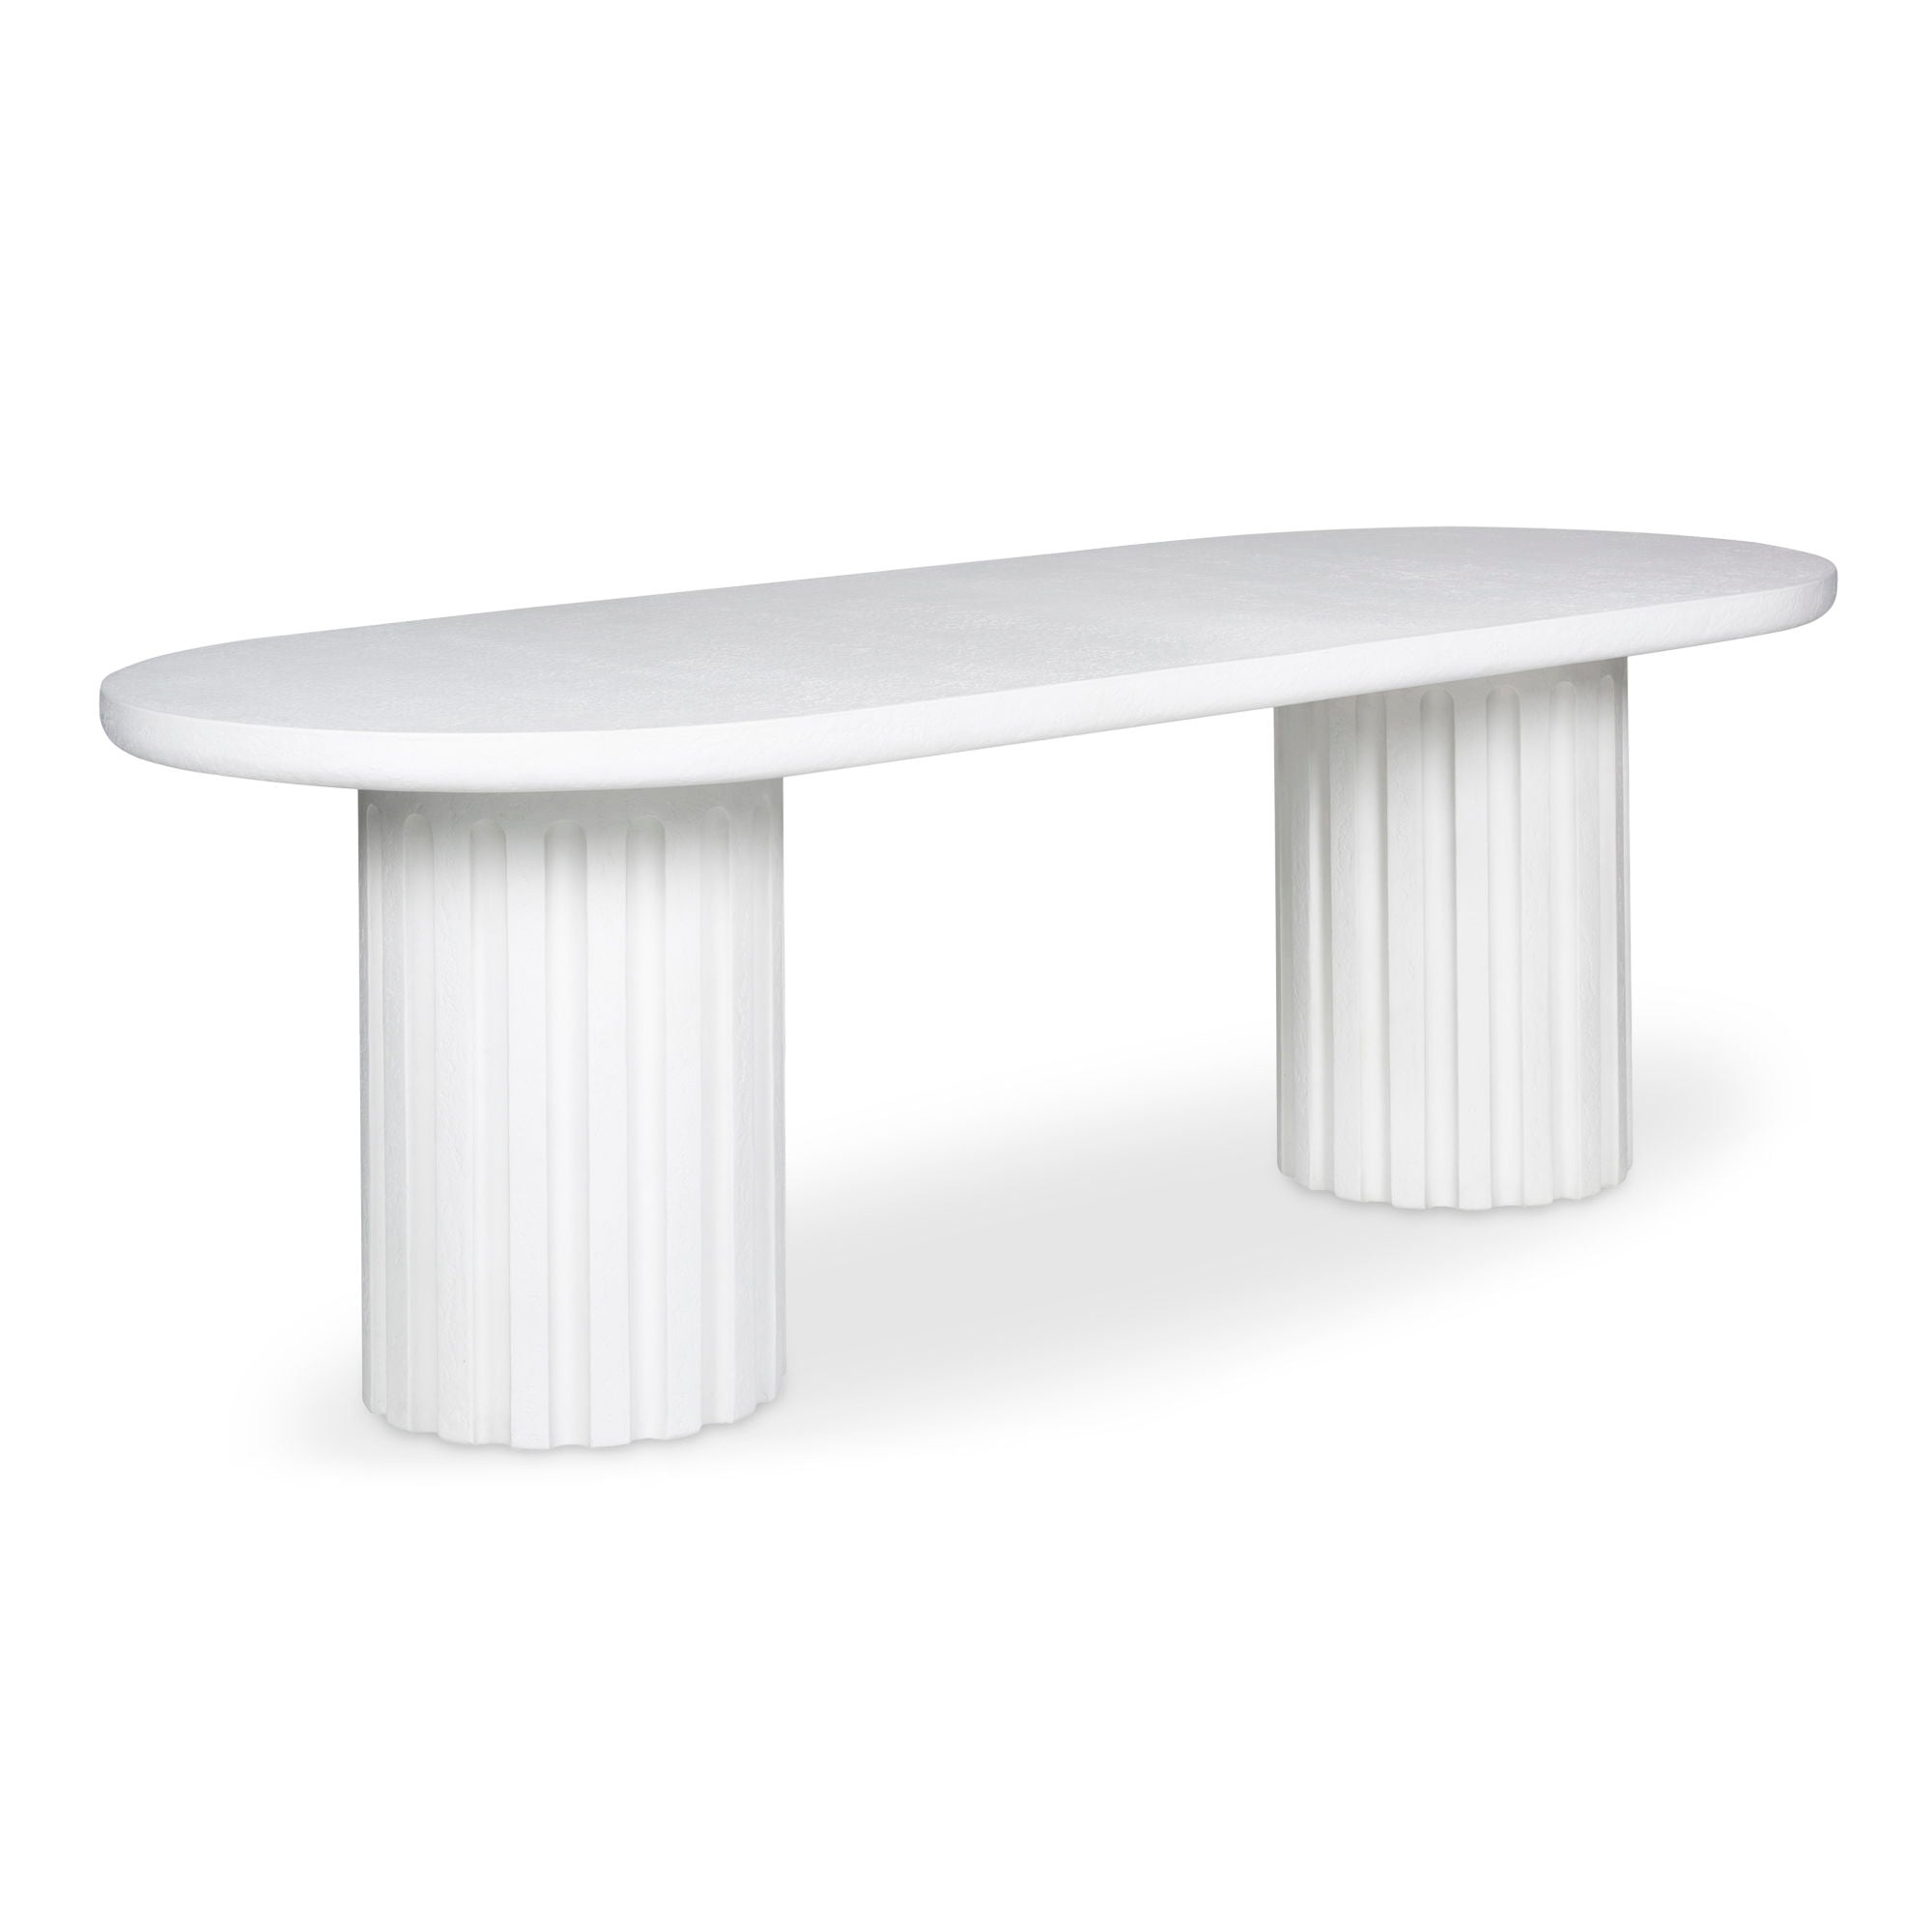 Eris - Outdoor Dining Table - White